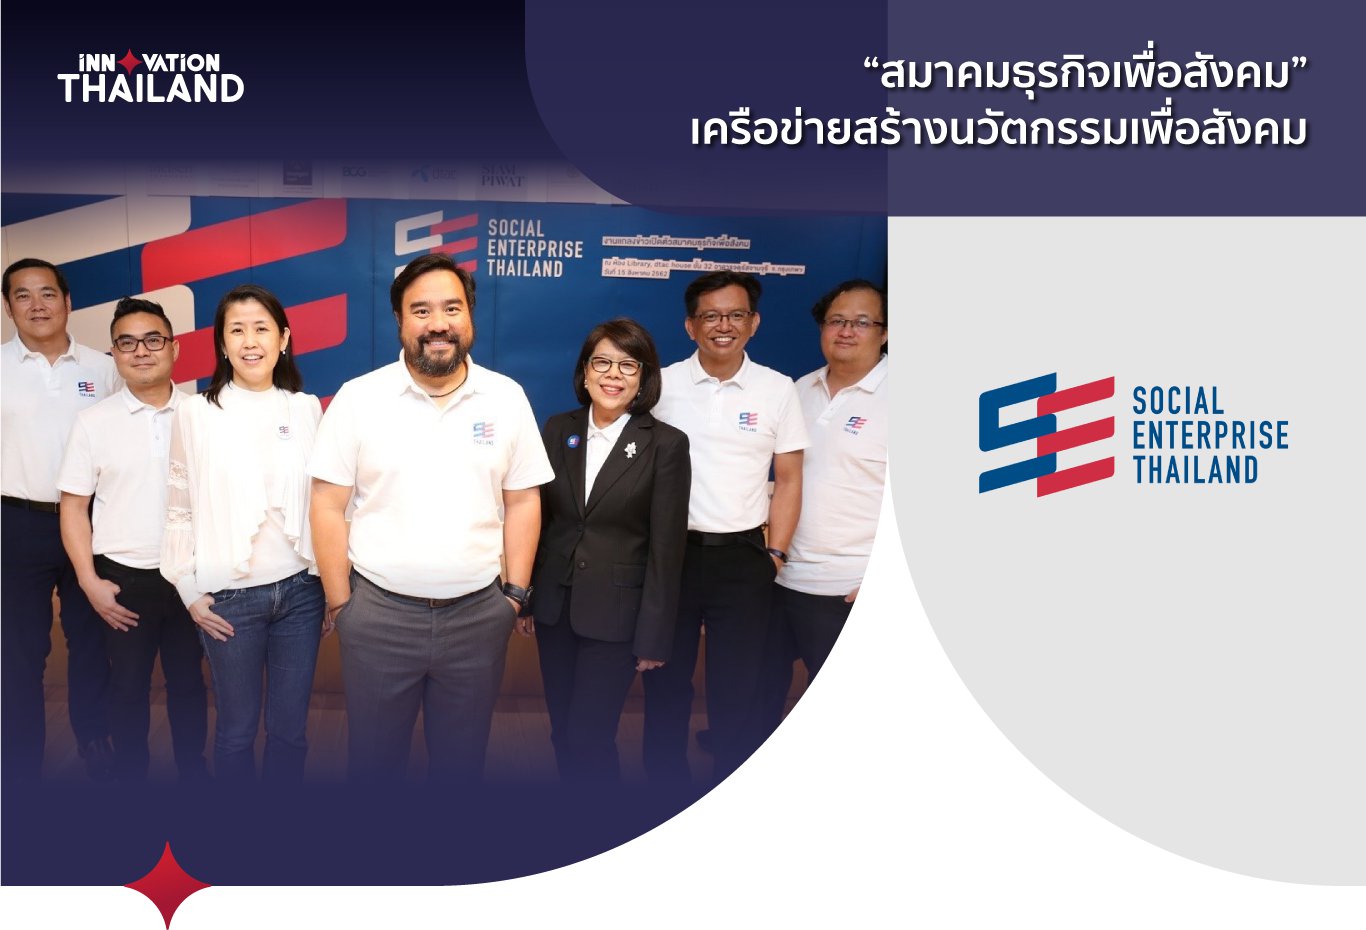 Social Enterprise Thailand a Member of the Innovation Thailand Alliance Supporting Innovations to Tackle Social Problems